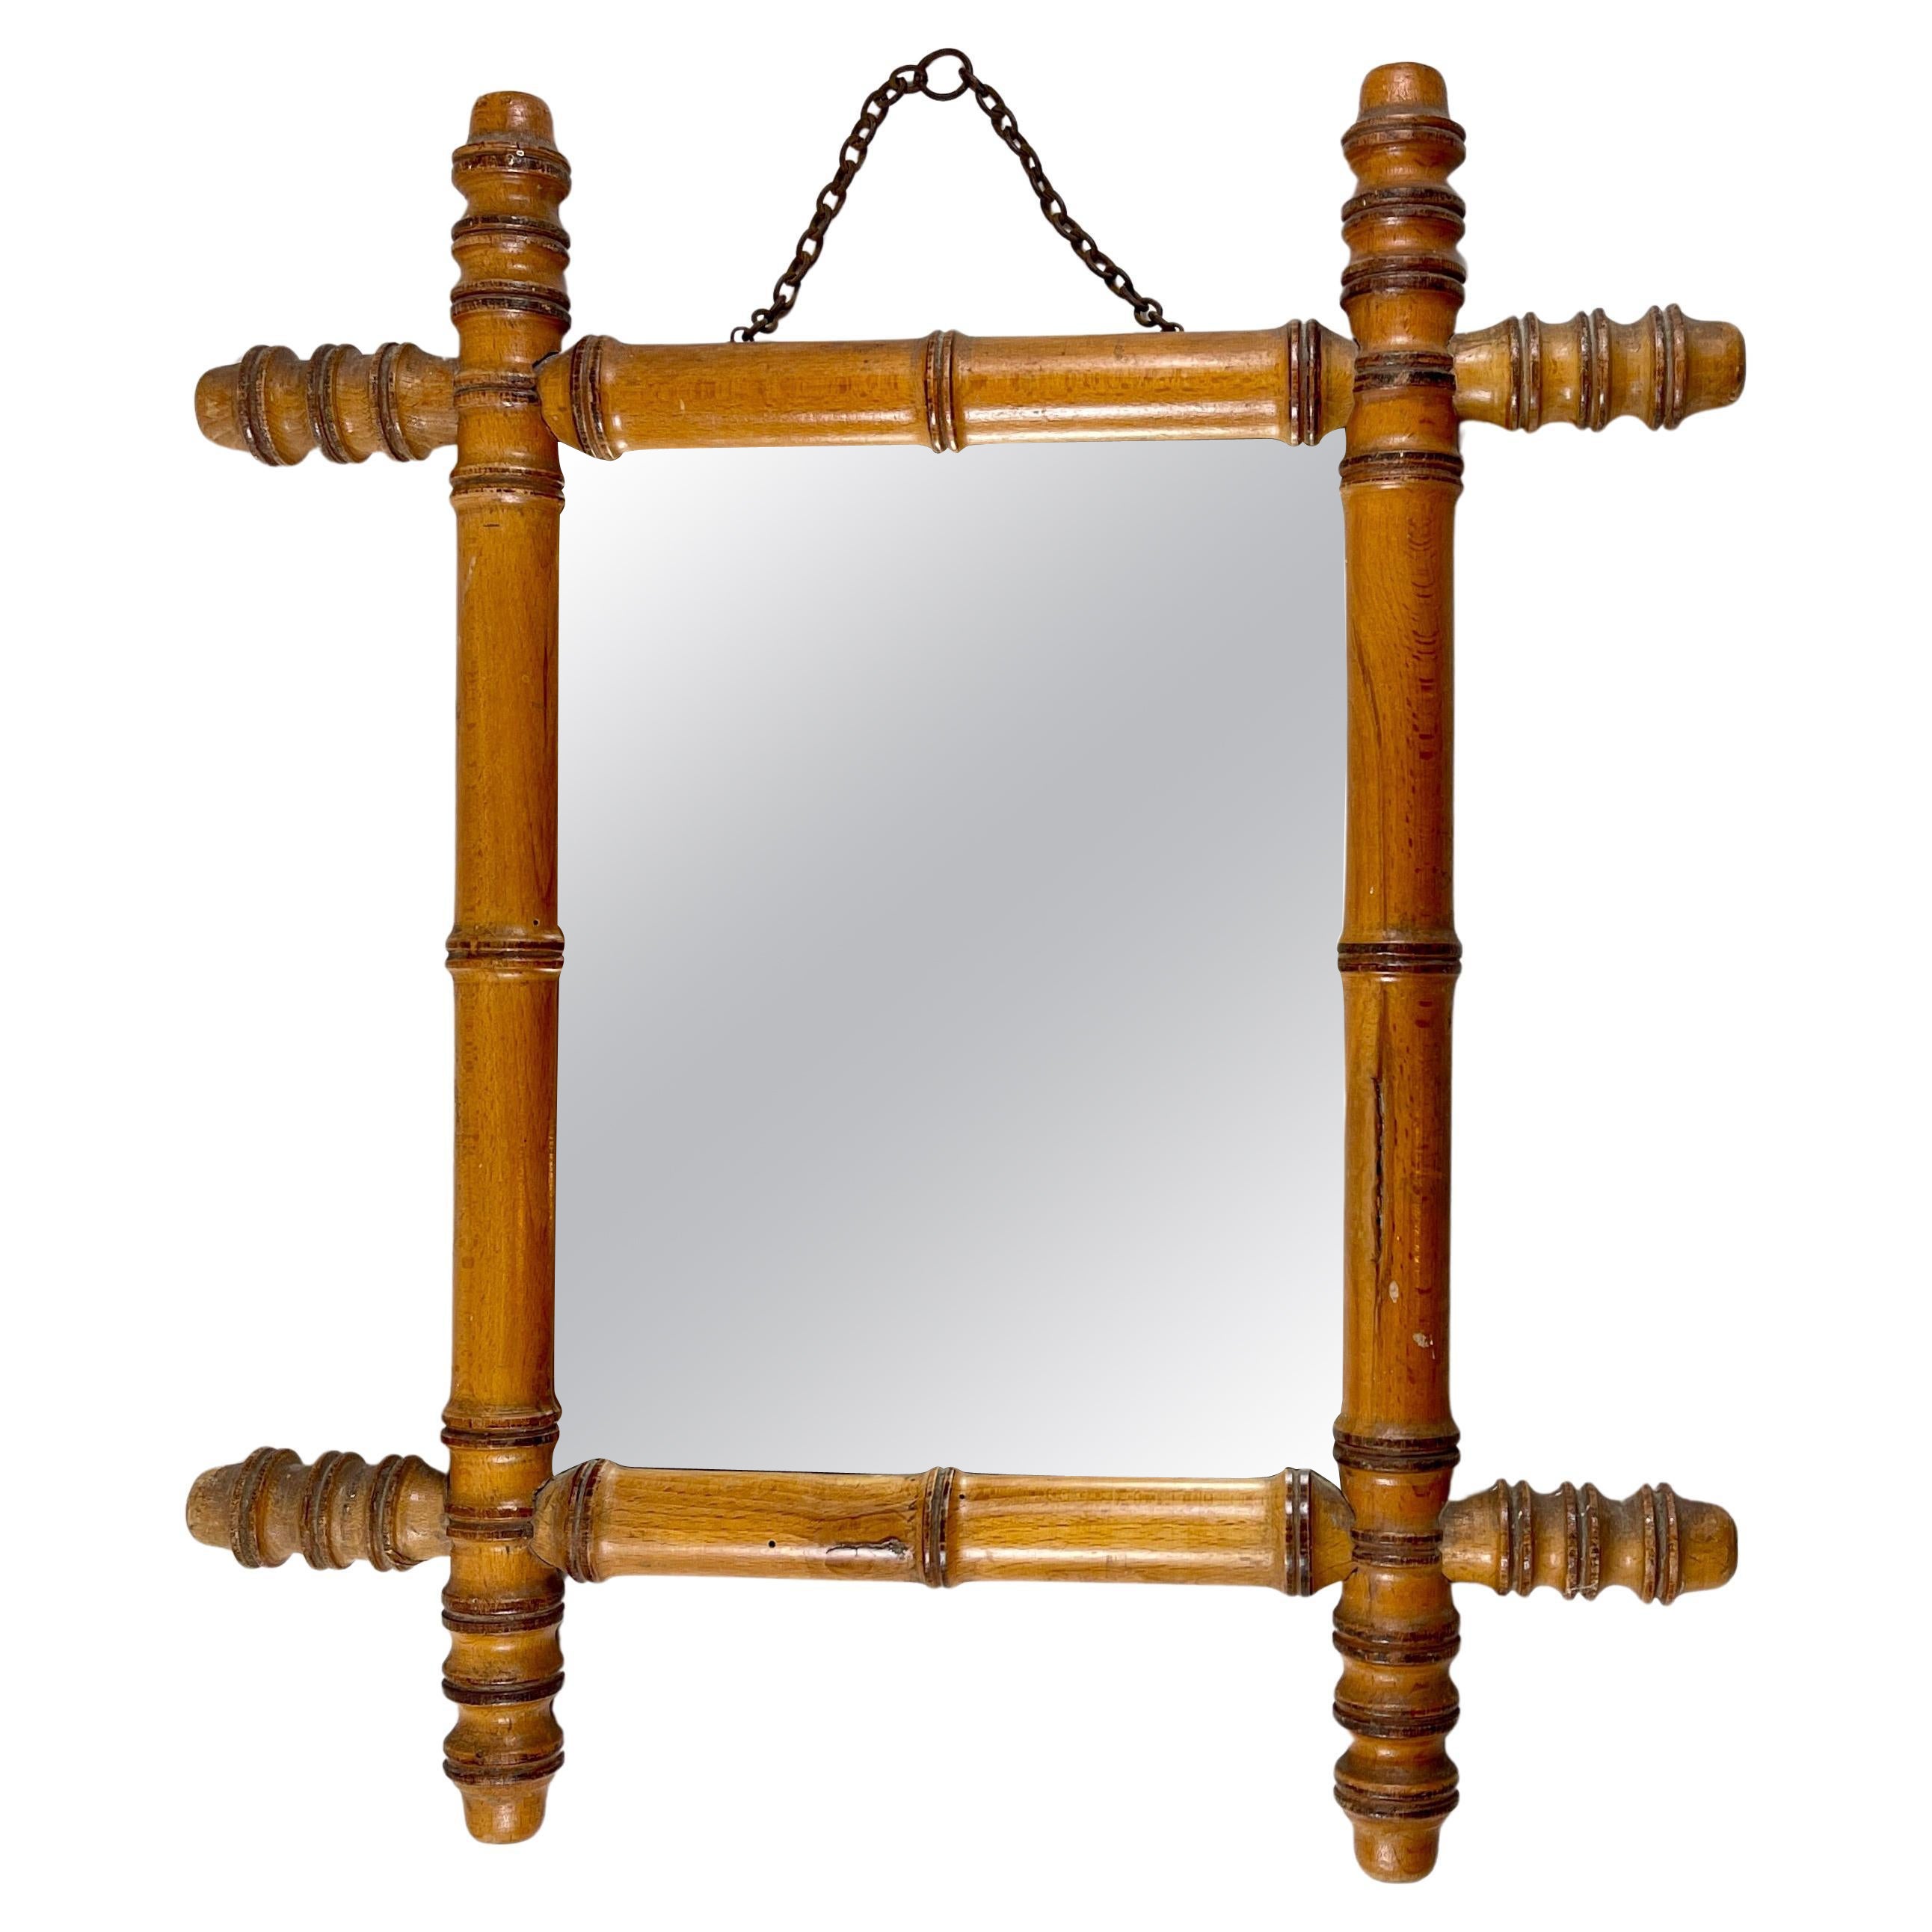 1920s French Faux Bamboo Wood Framed Mirror